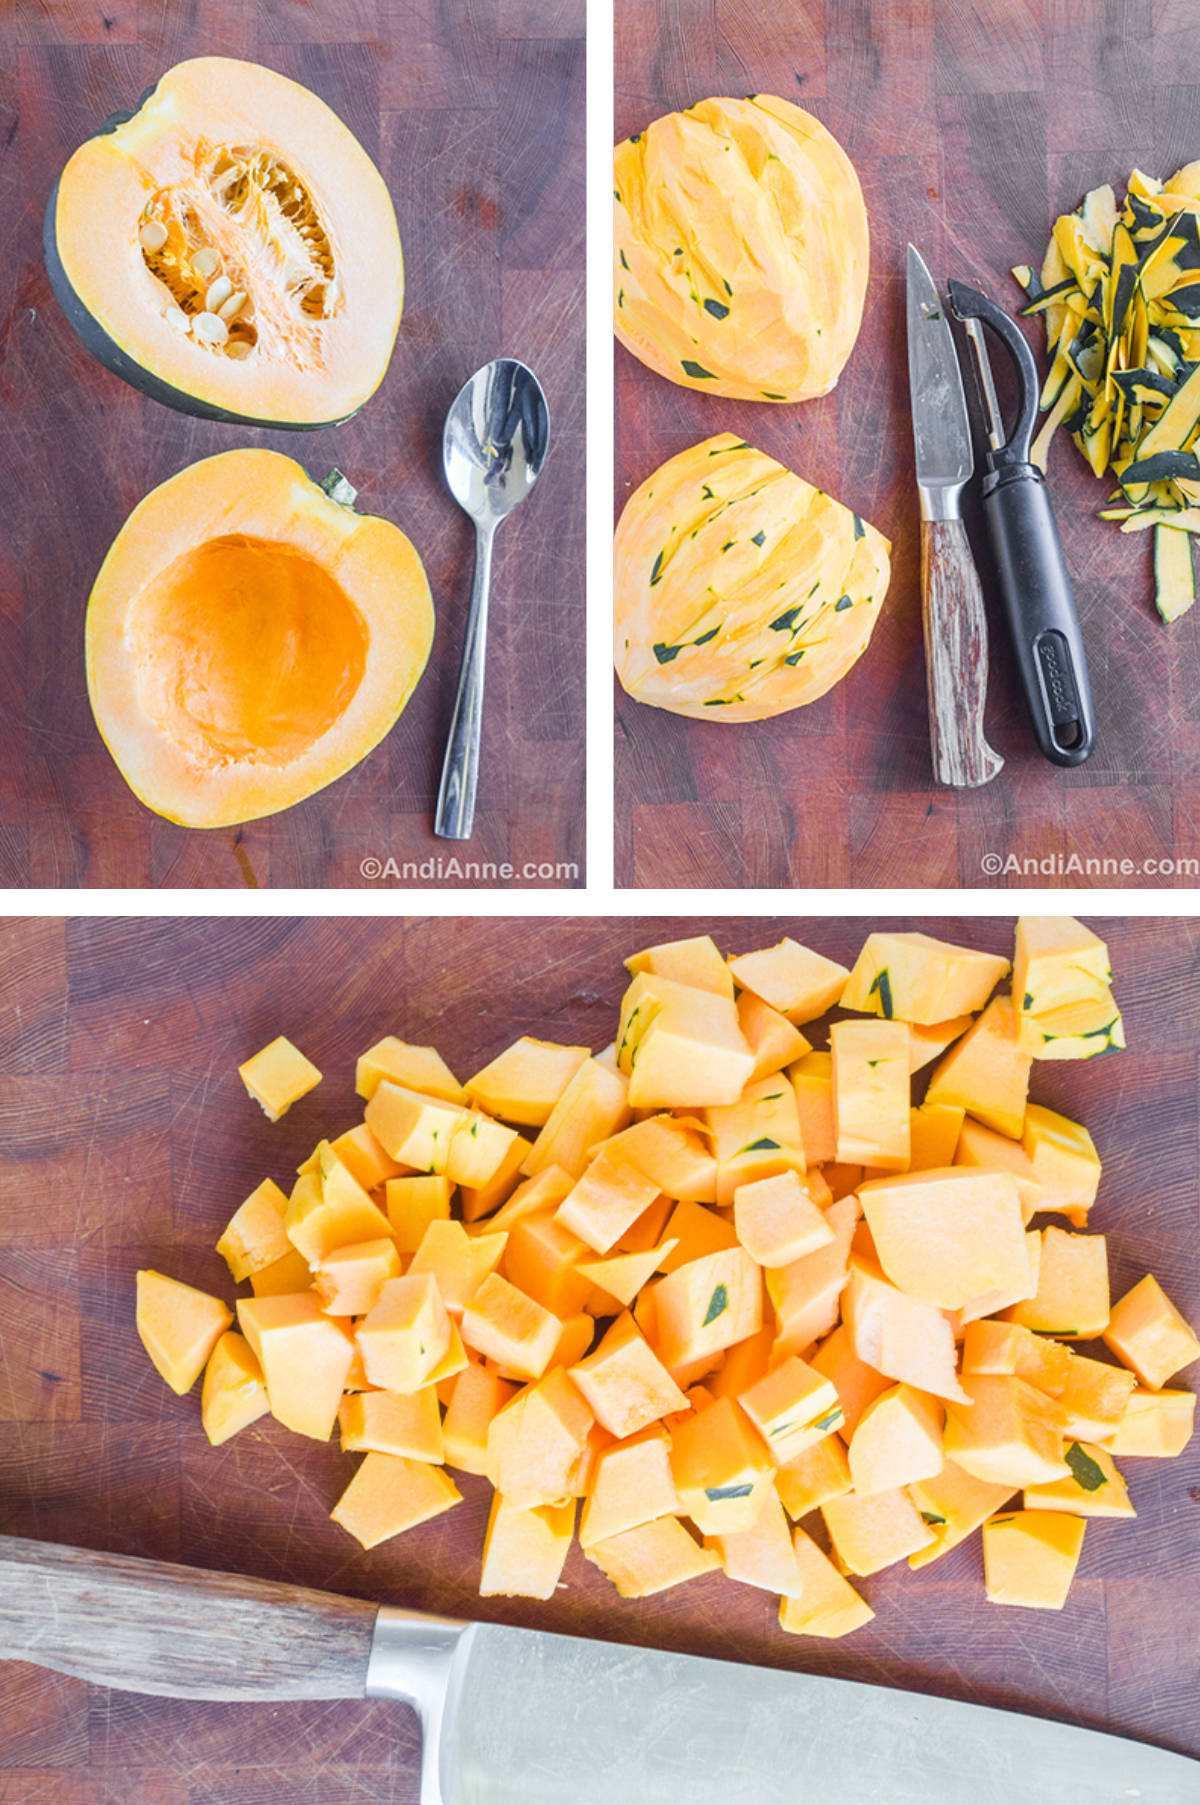 Three images showing steps to make acorn squash including squash sliced in half with seeds scooped out. Squash skin cut off with vegetable peeler and a knife. And chopped squash on the counter with a knife.